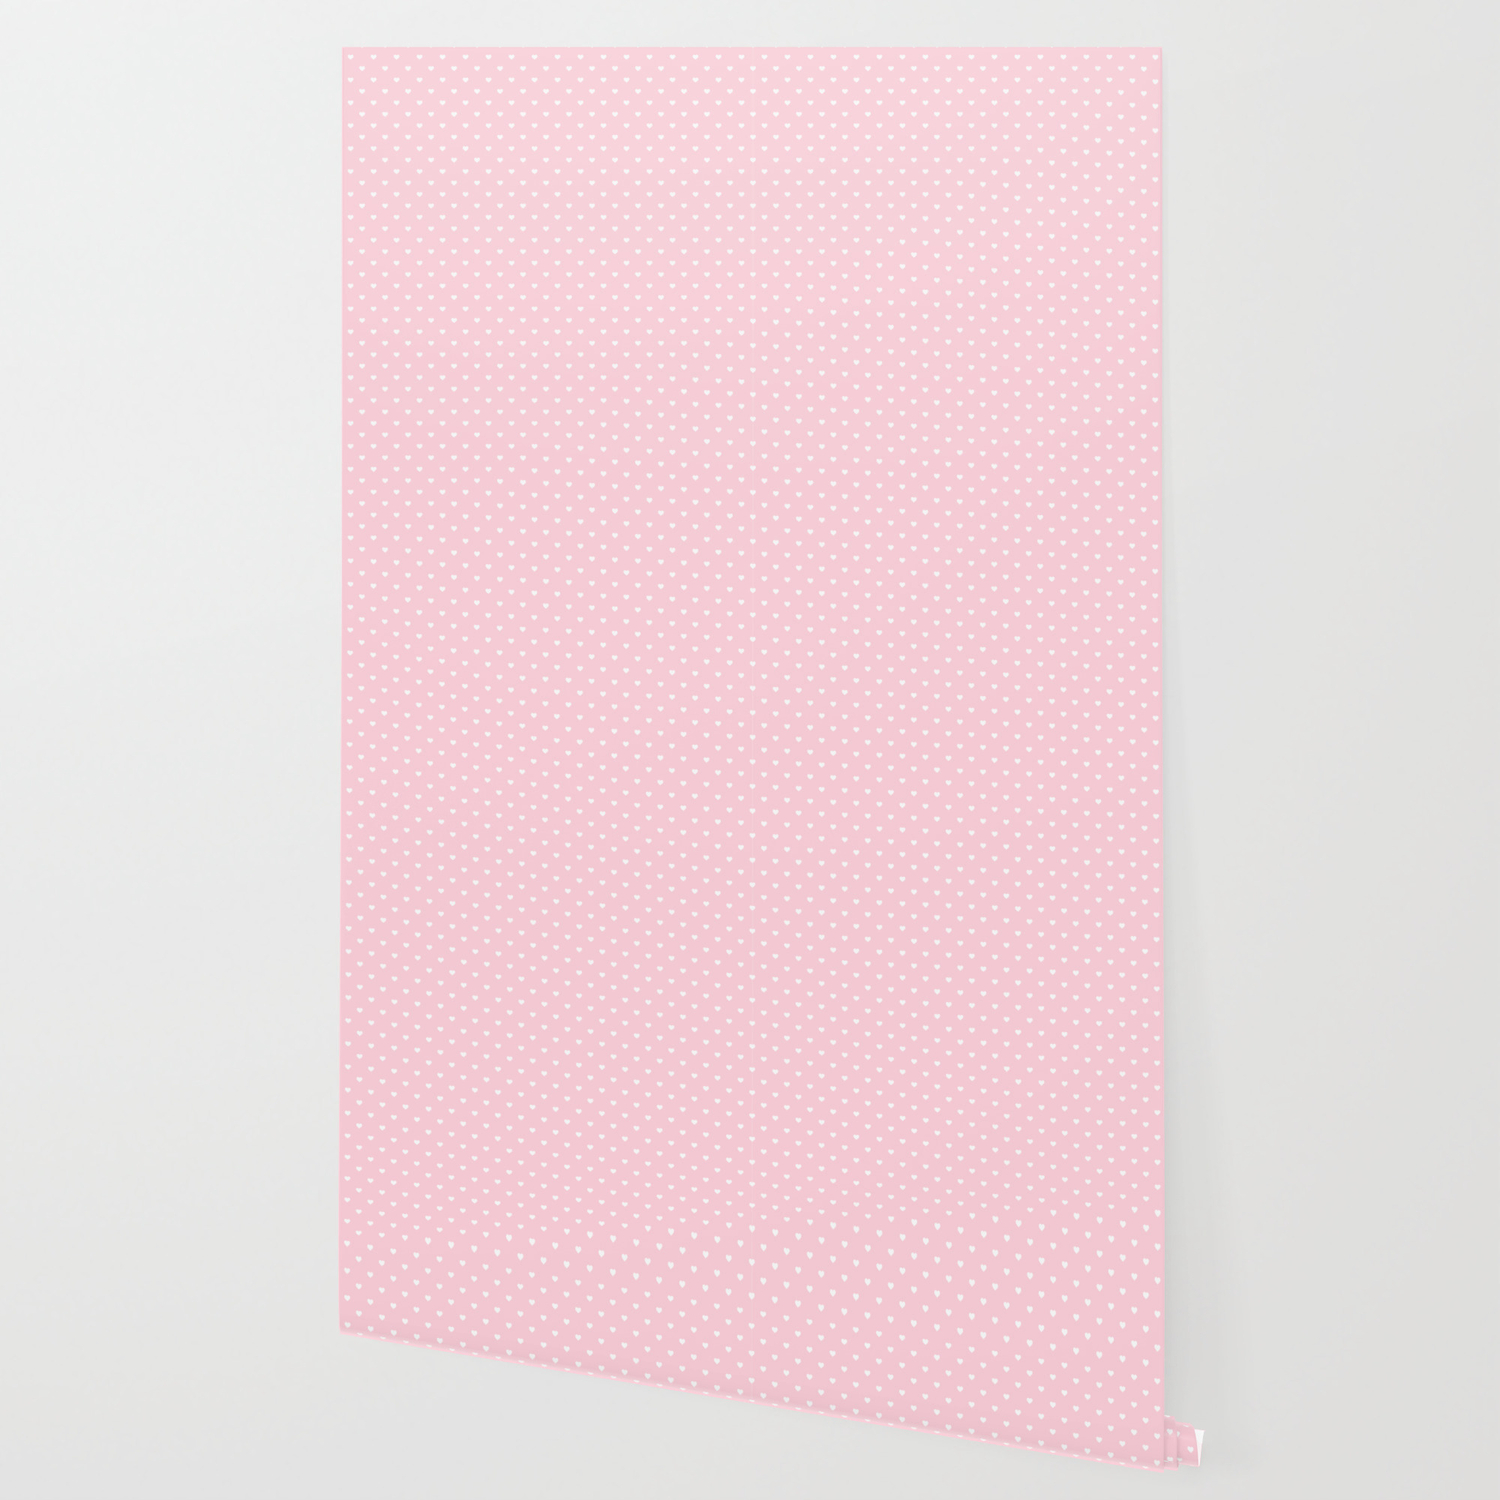 White Polka Dot Hearts On Light Soft Pastel Pink Wallpaper By